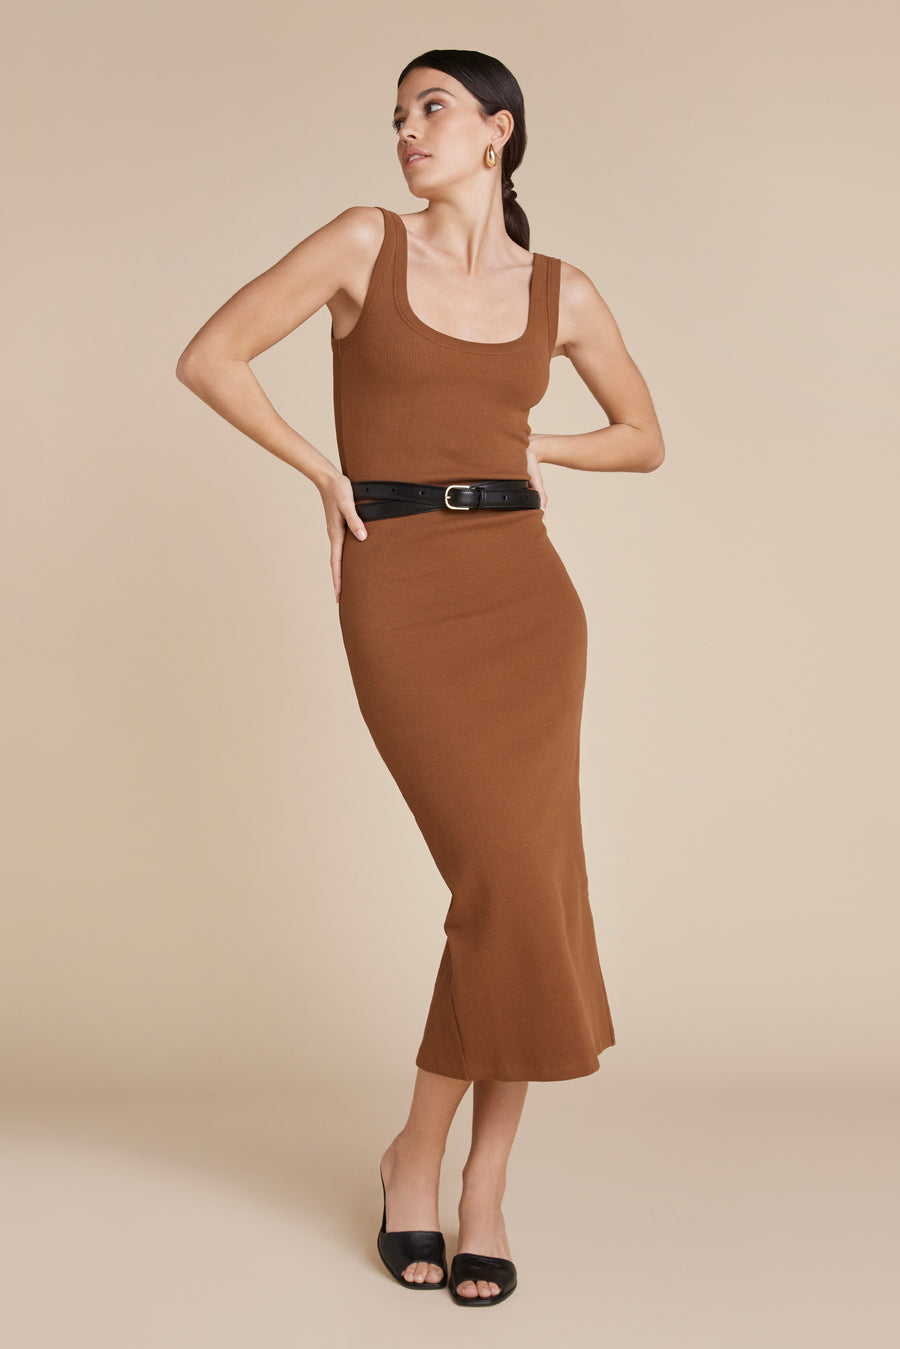 The Long Scoop It Up Dress in Toffee